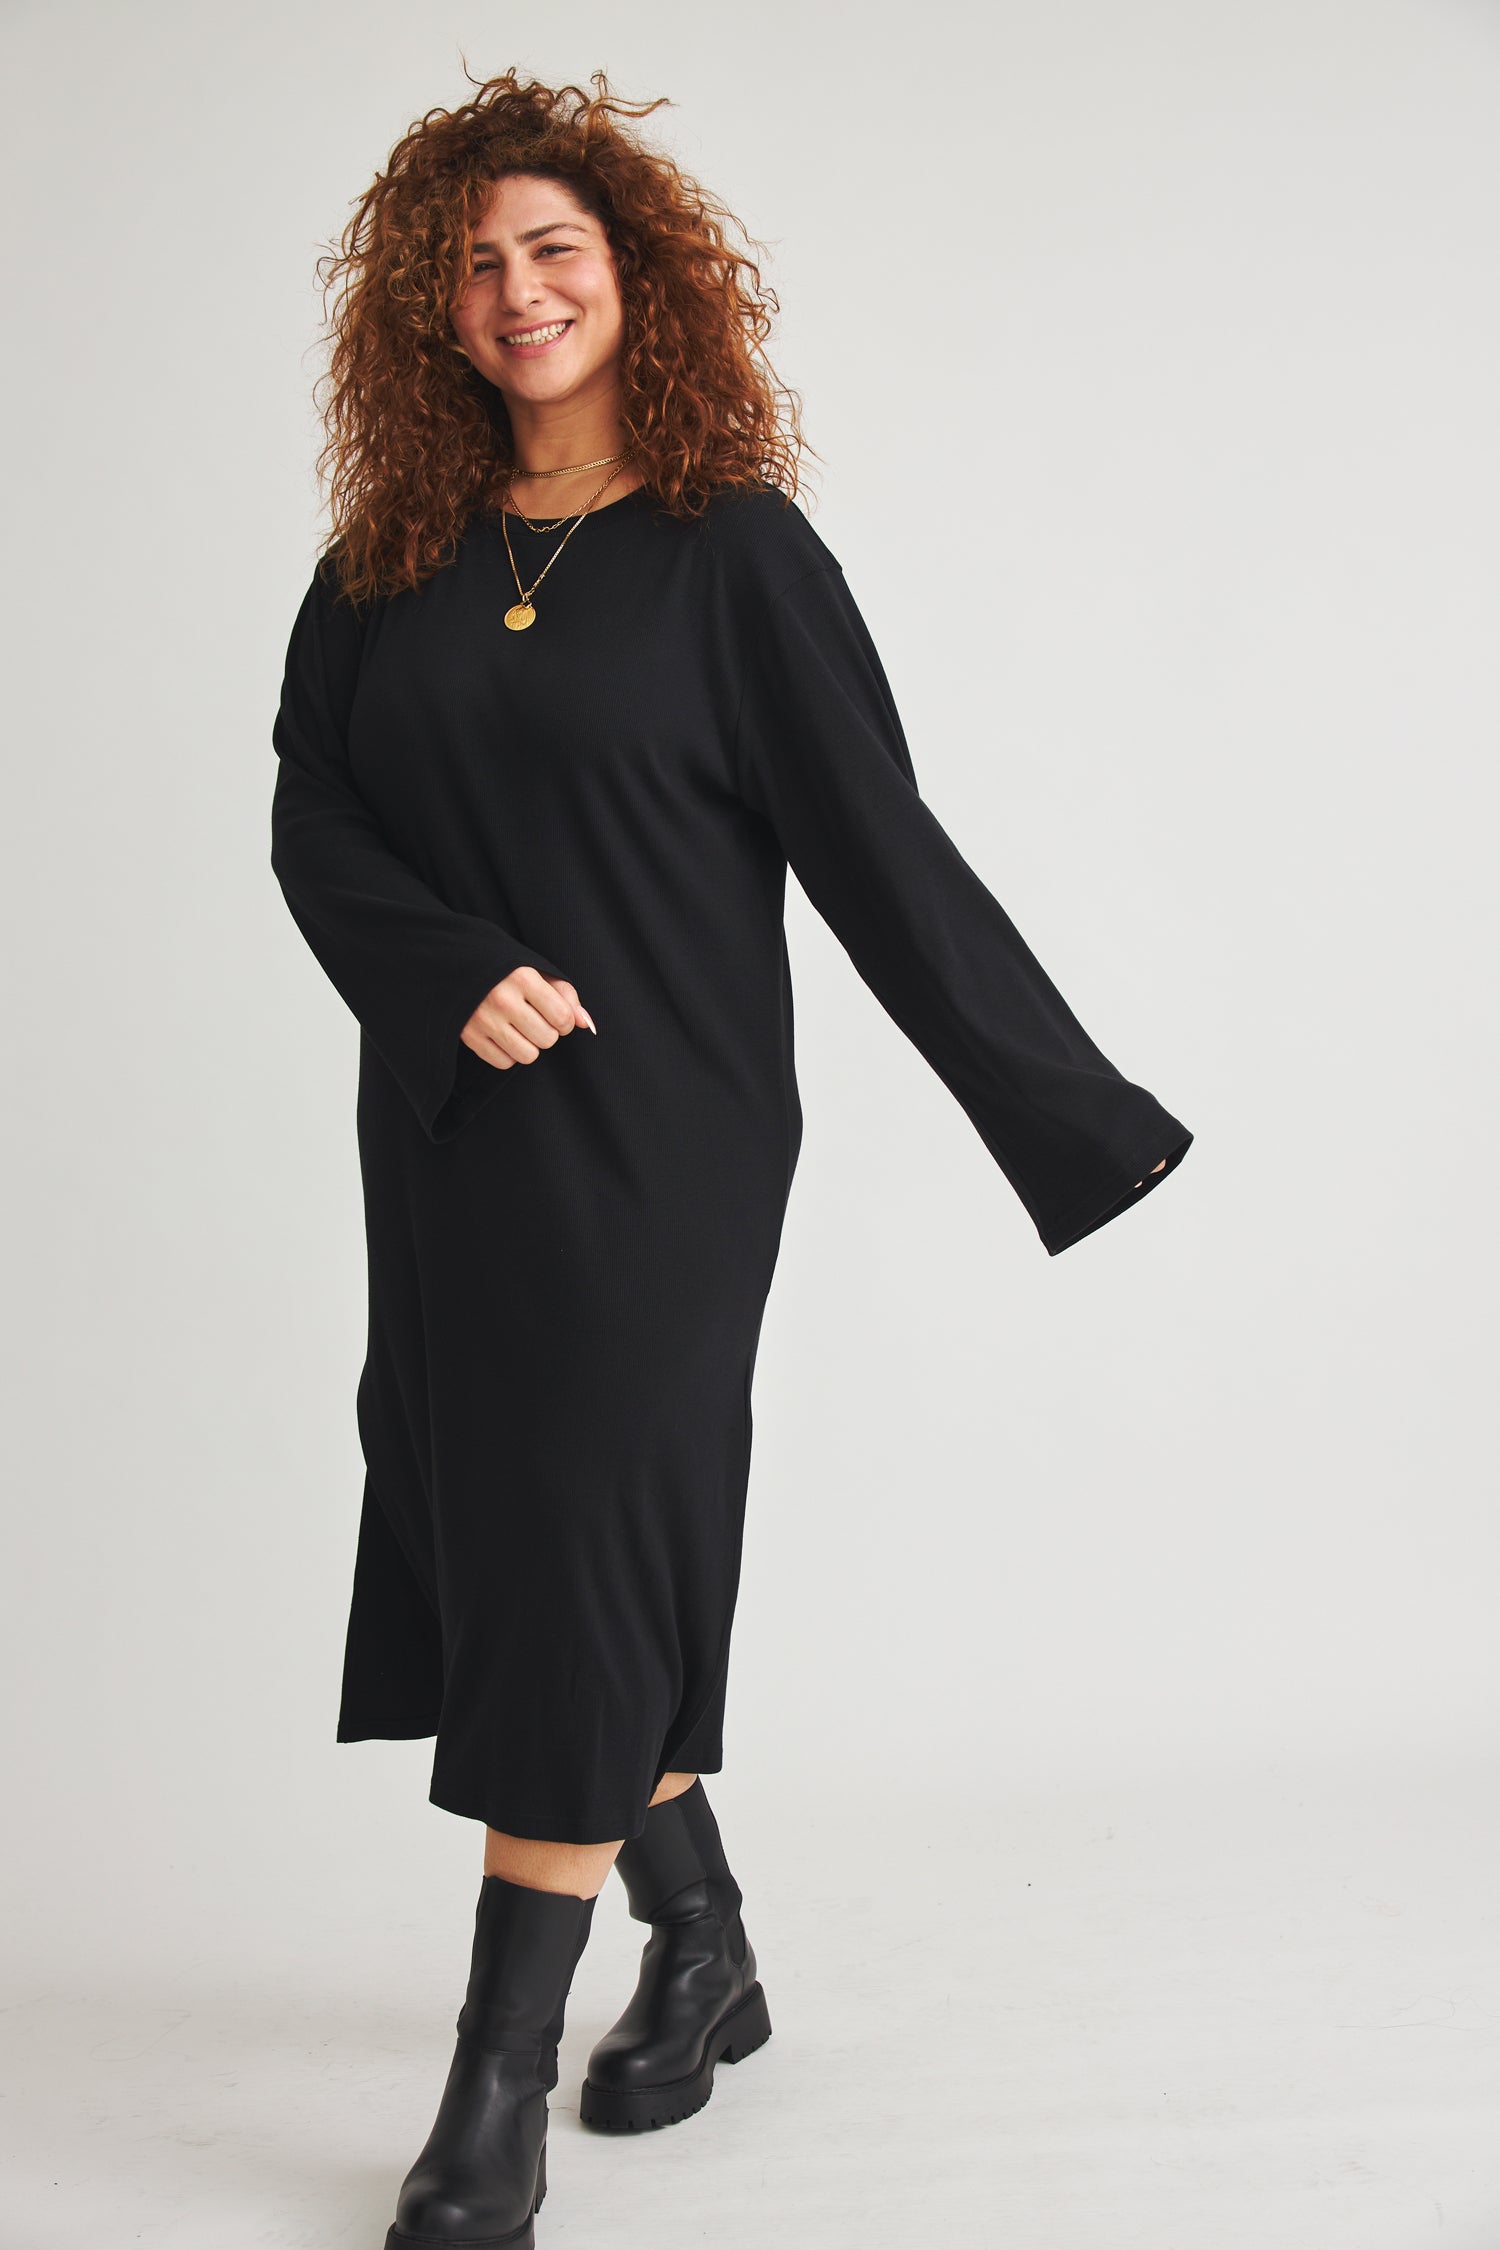 Black organic cotton Becca dress from Baige the Label